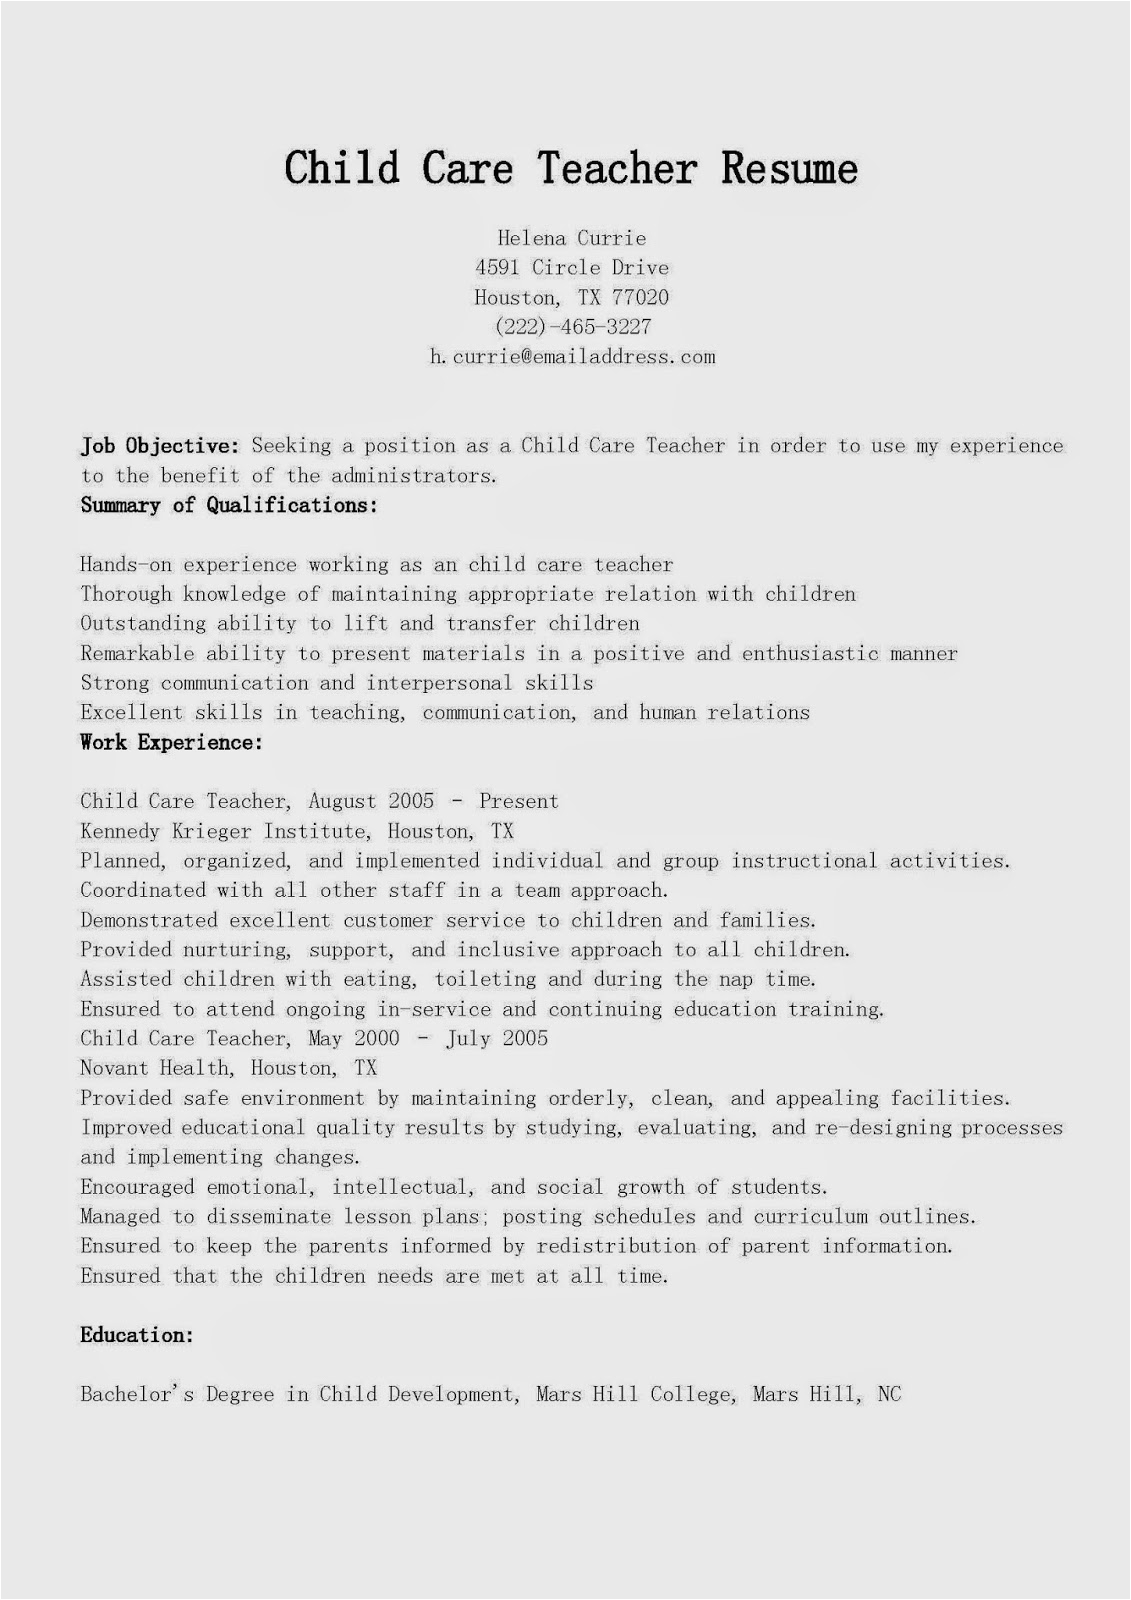 Sample Resume Objective for Child Care Resume Samples Child Care Teacher Resume Sample